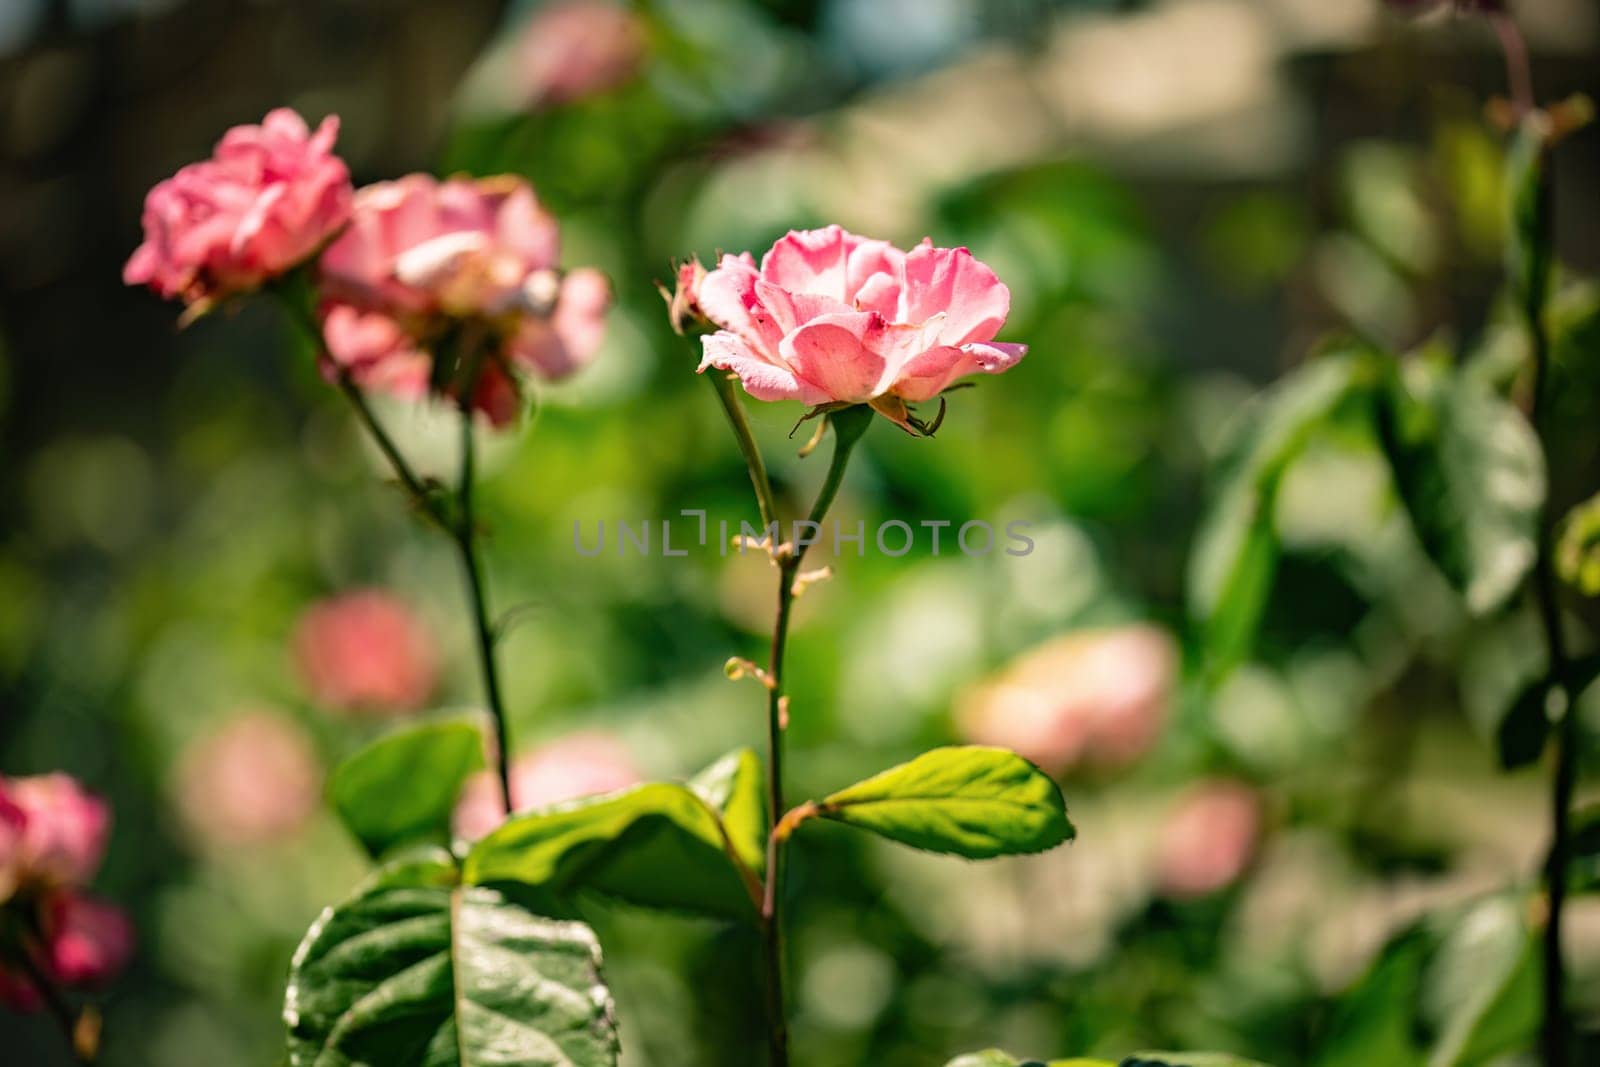 Pink flowers are in full bloom among lush green leaves in a vibrant garden setting.